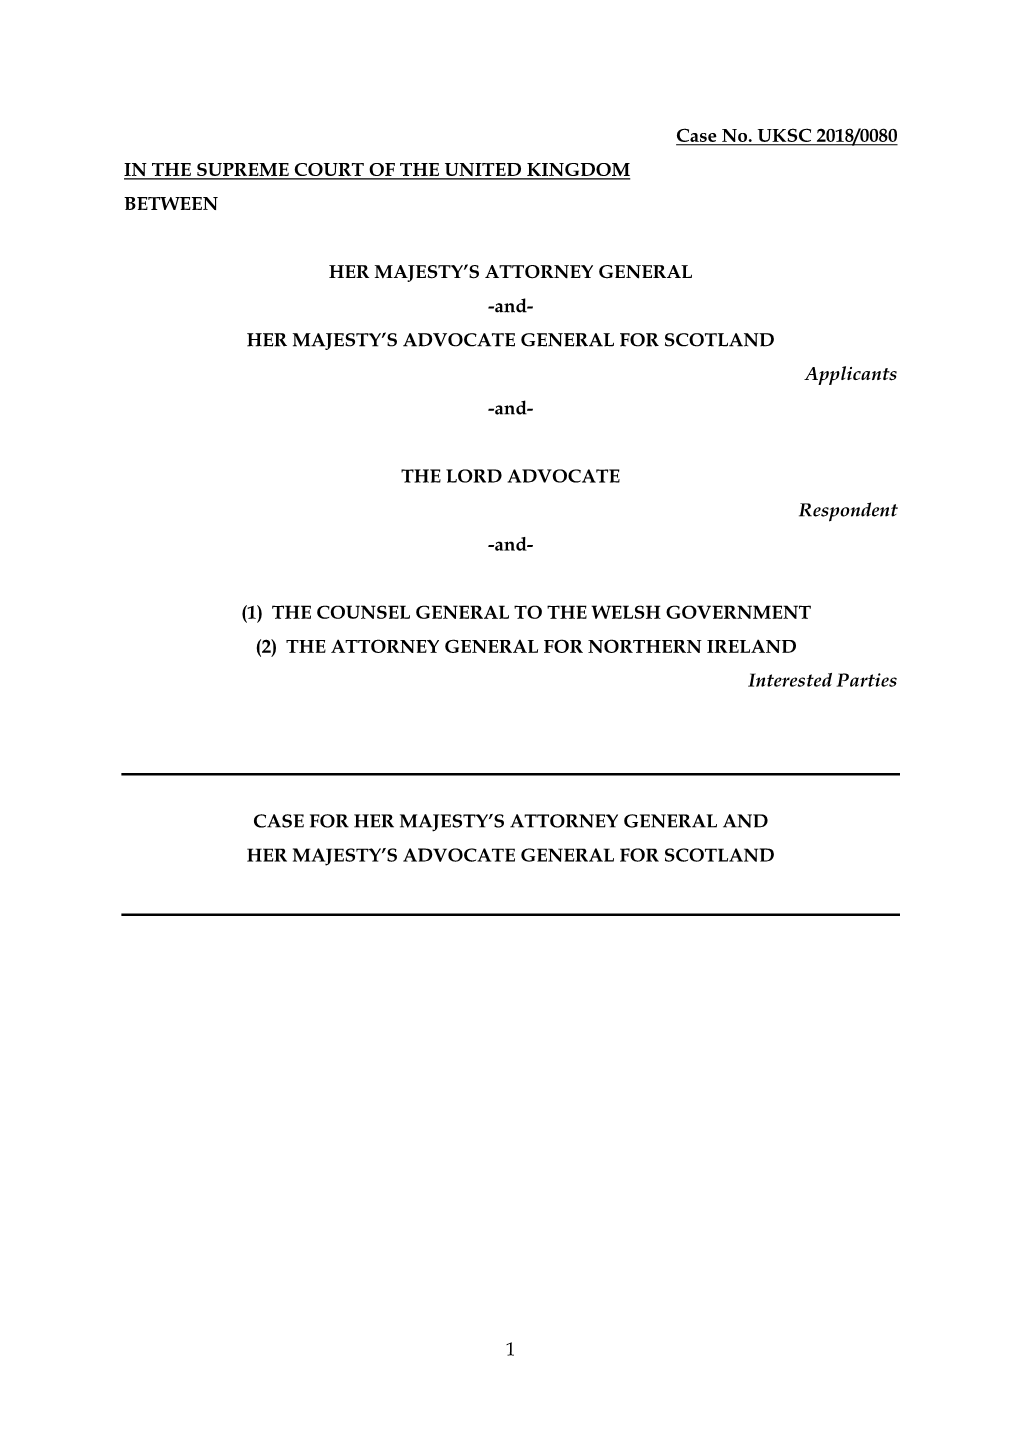 1 Case No. UKSC 2018/0080 in the SUPREME COURT OF